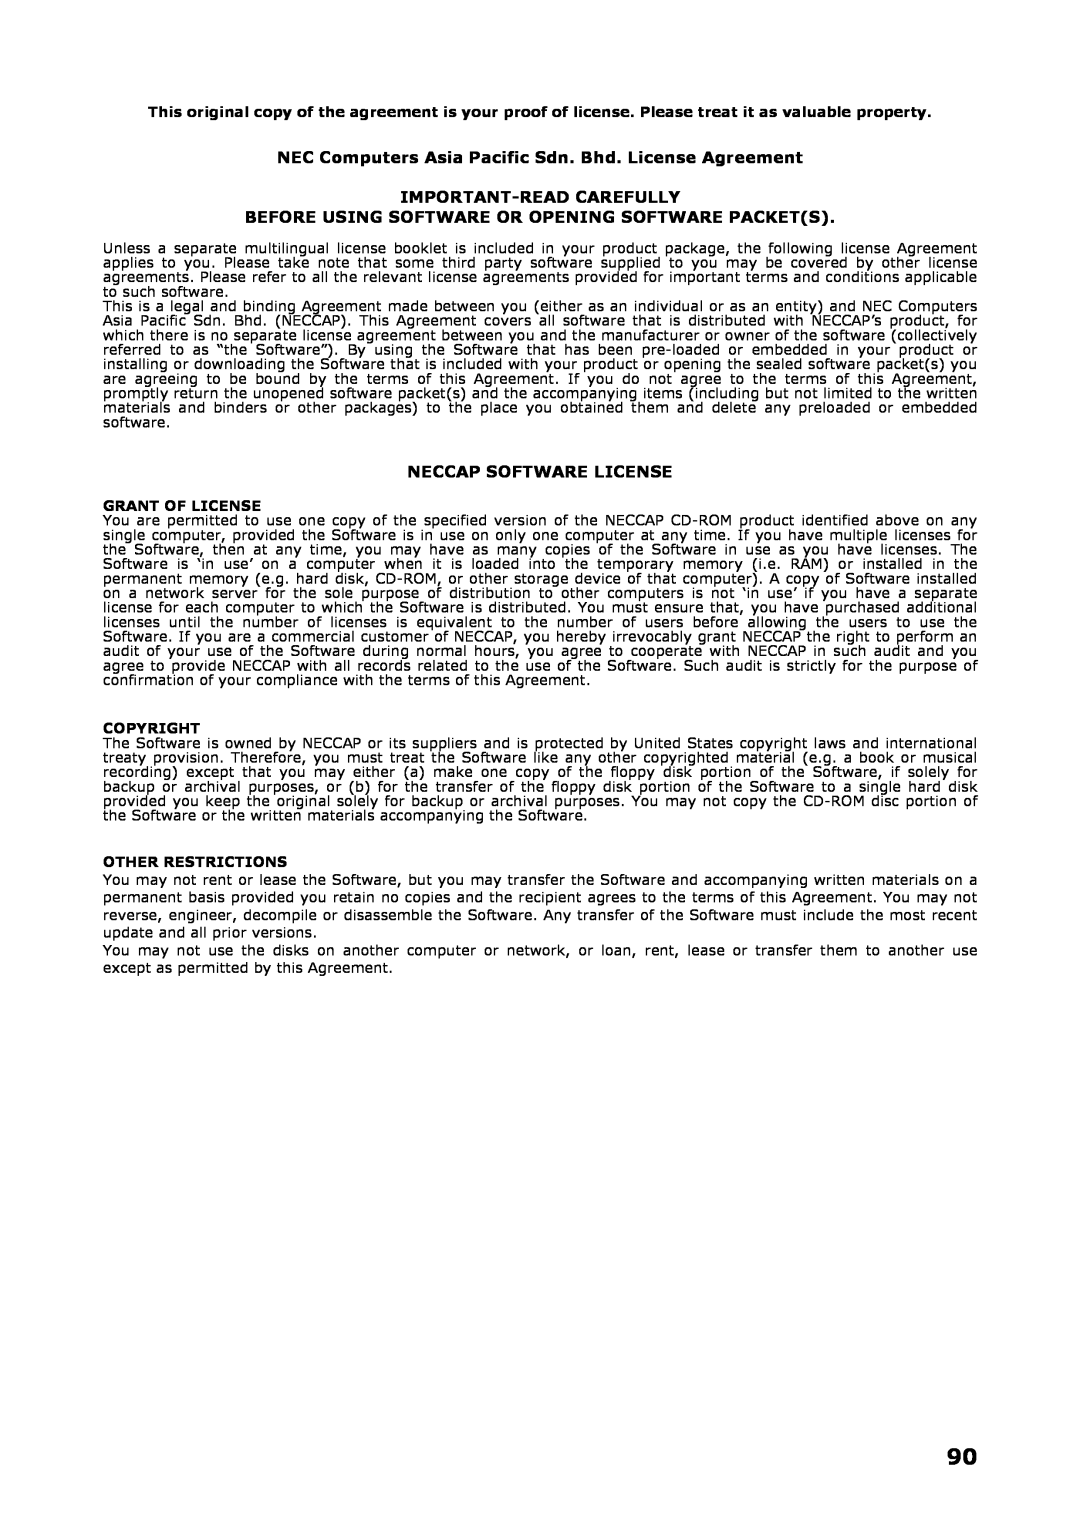 NEC P8510 manual NEC Computers Asia Pacific Sdn. Bhd. License Agreement, Important-Read Carefully, Neccap Software License 